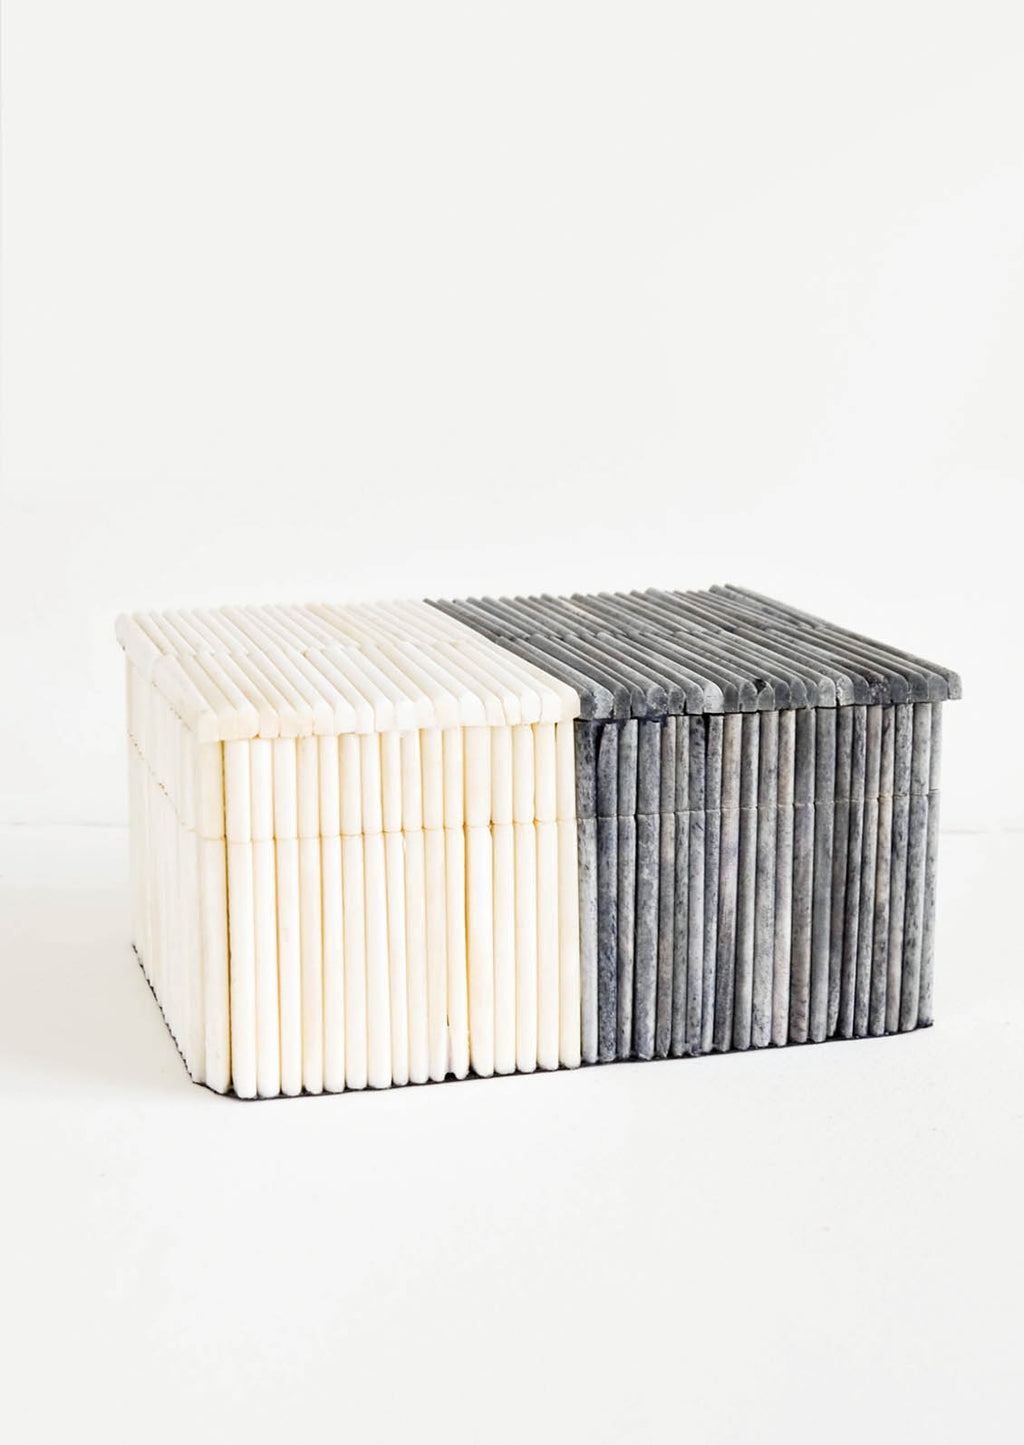 1: Decorative storage box in rectangular shape, made from bone in ribbed, two-tone design in grey and white